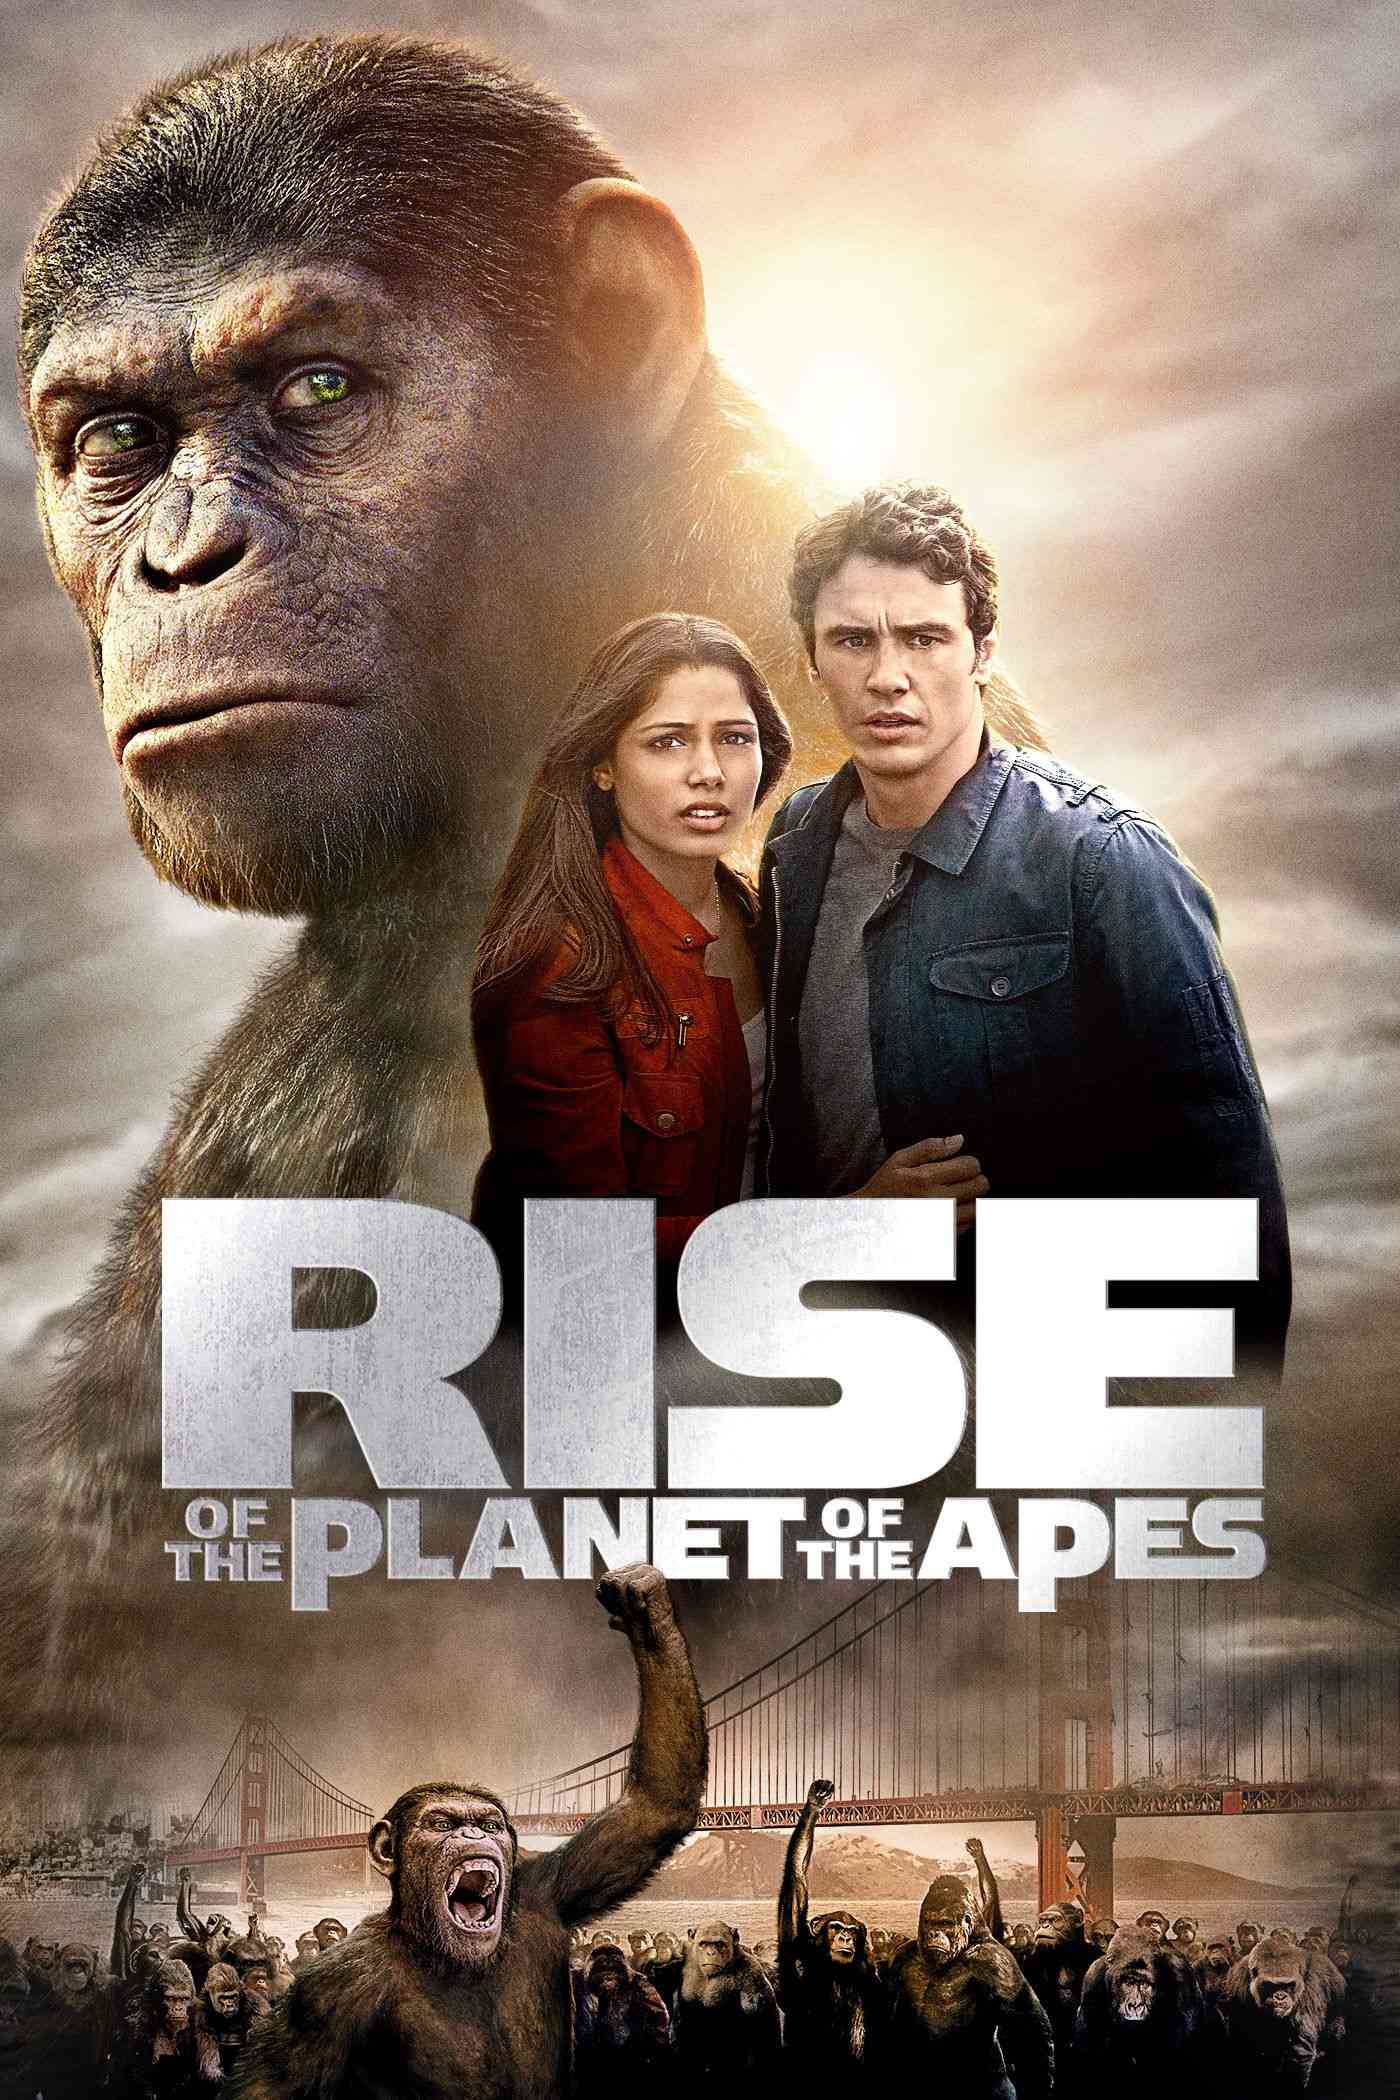 FULL MOVIE: Rise Of The Planet Of The Apes (2011) [Action]